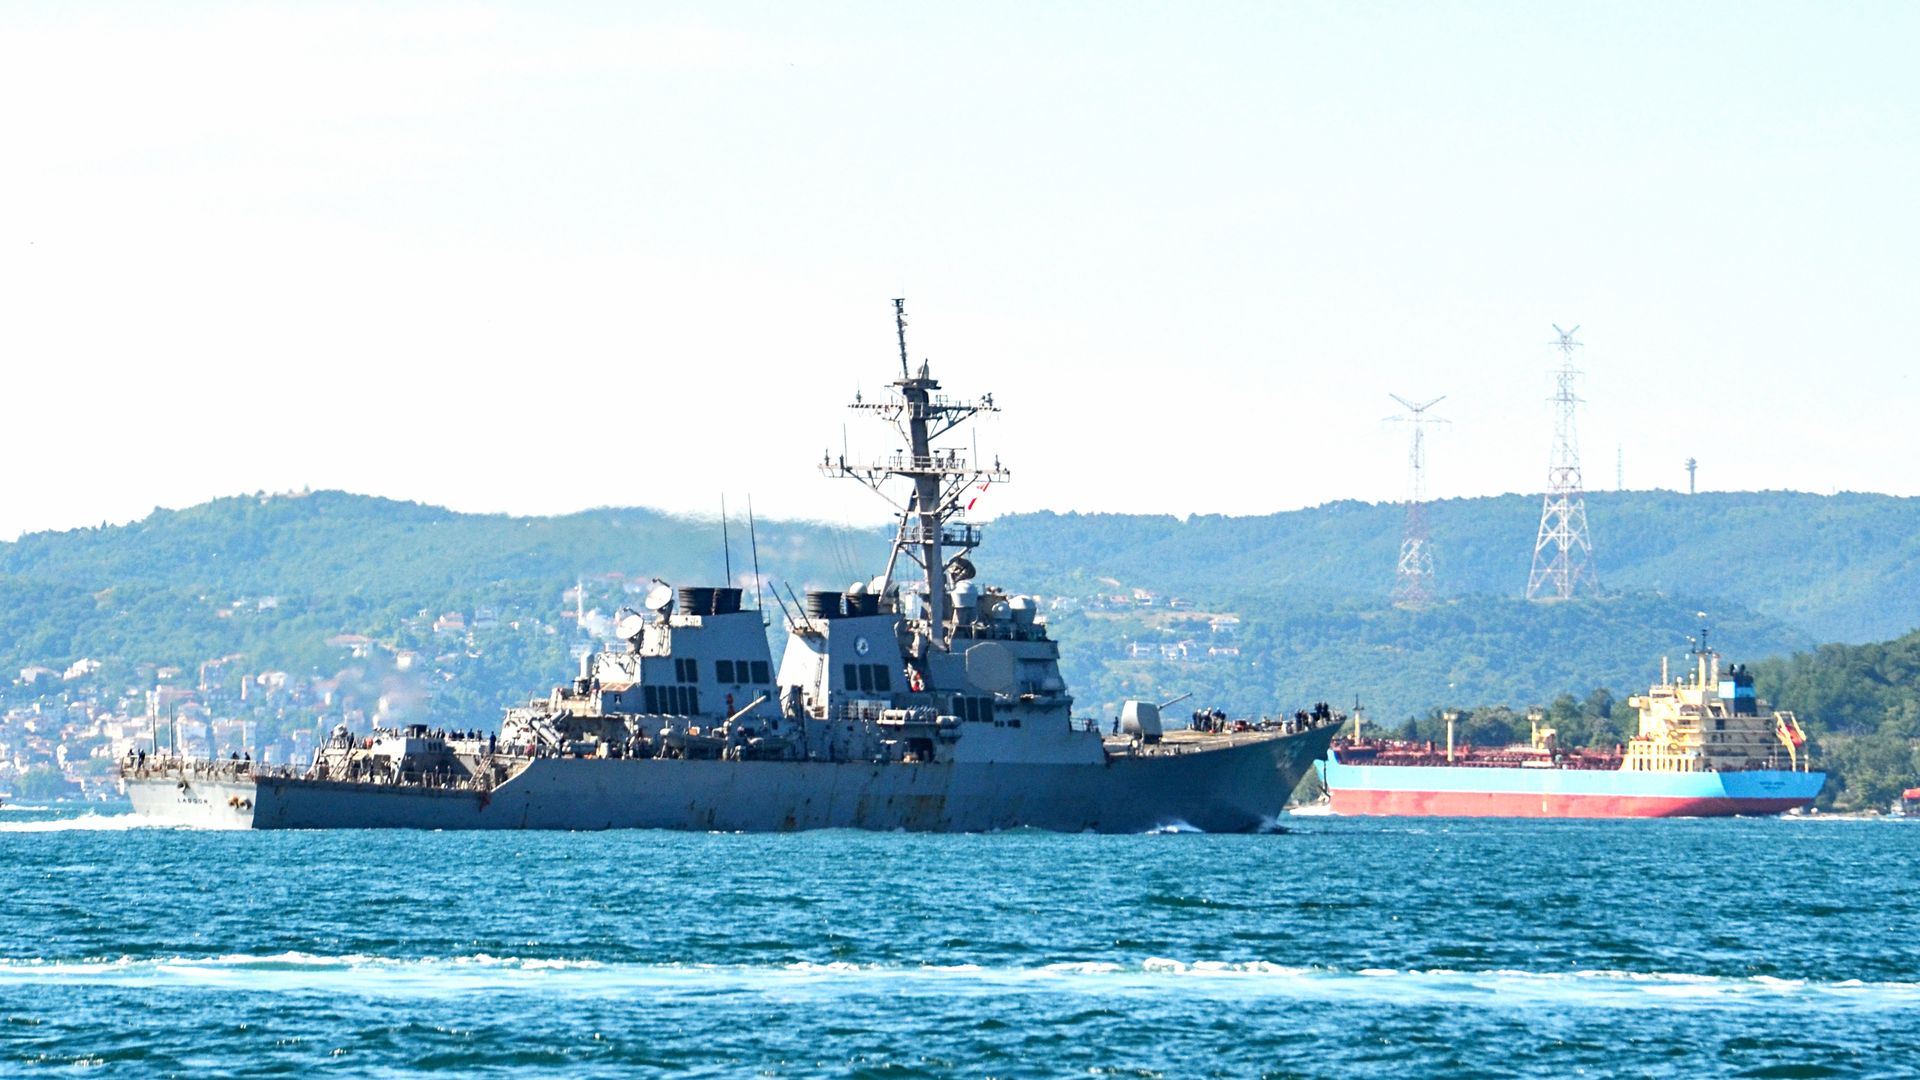 The USS Laboon passing through the Bosphorus in Istanbul, Turkey in June 2021.